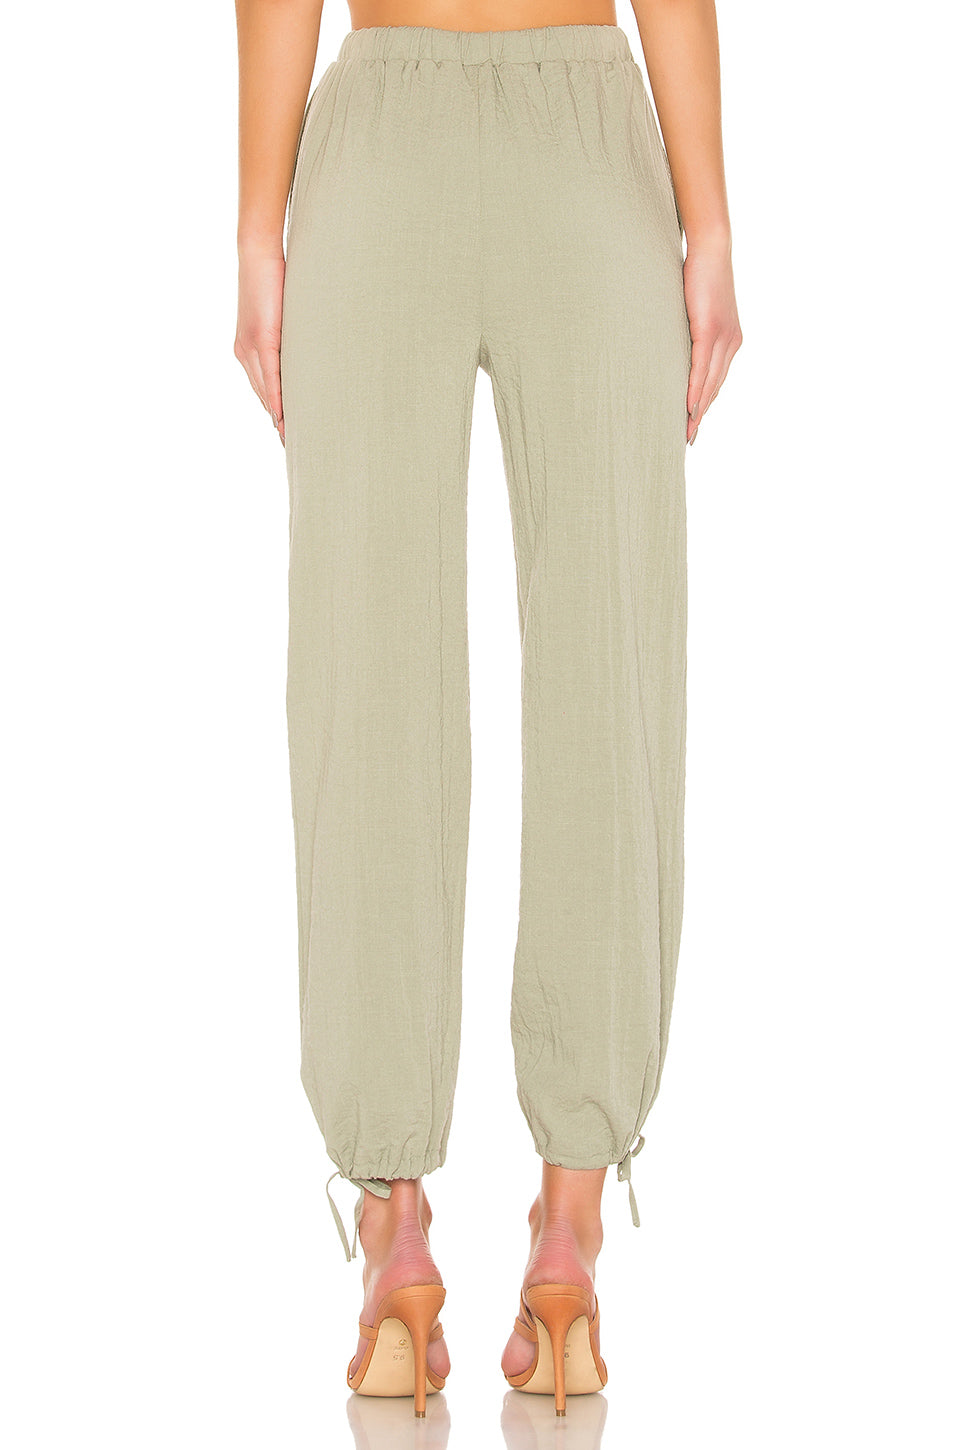 Bethany Pants in SAGE